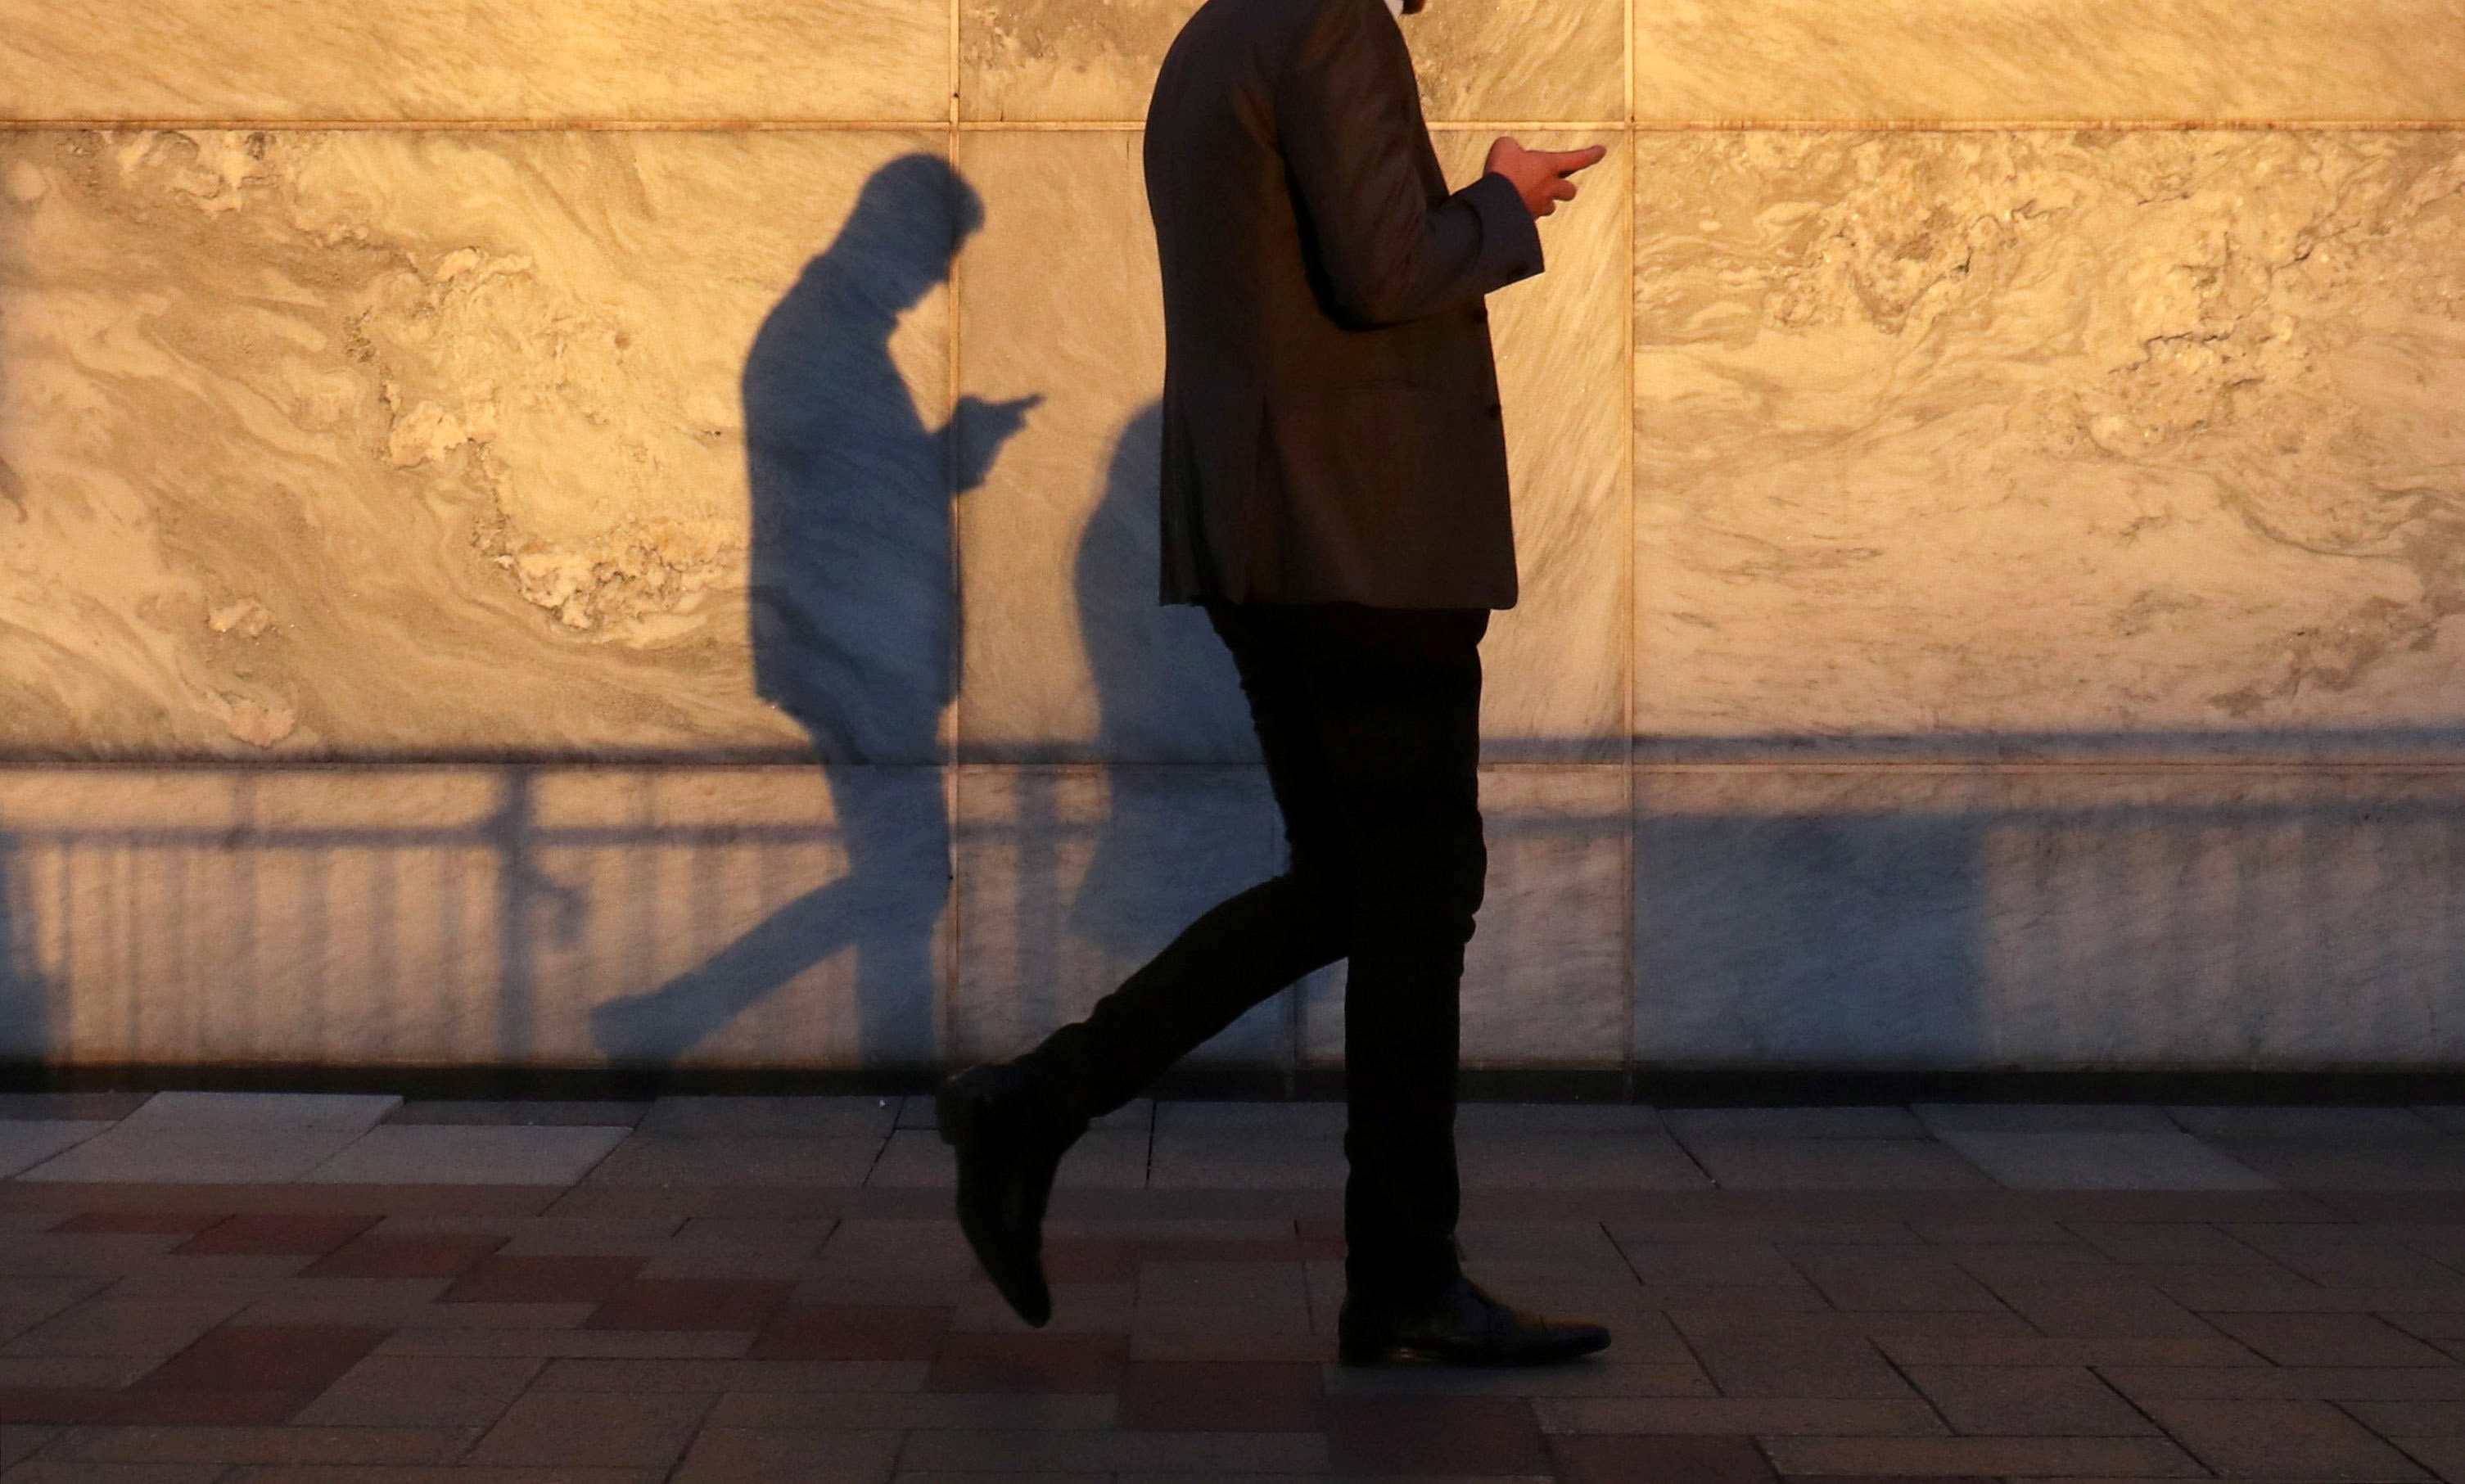 An unidentified man using a smart phone walks through London's Canary Wharf financial district in the evening light in London, Britain, September 28, 2018. REUTERS/Russell Boyce